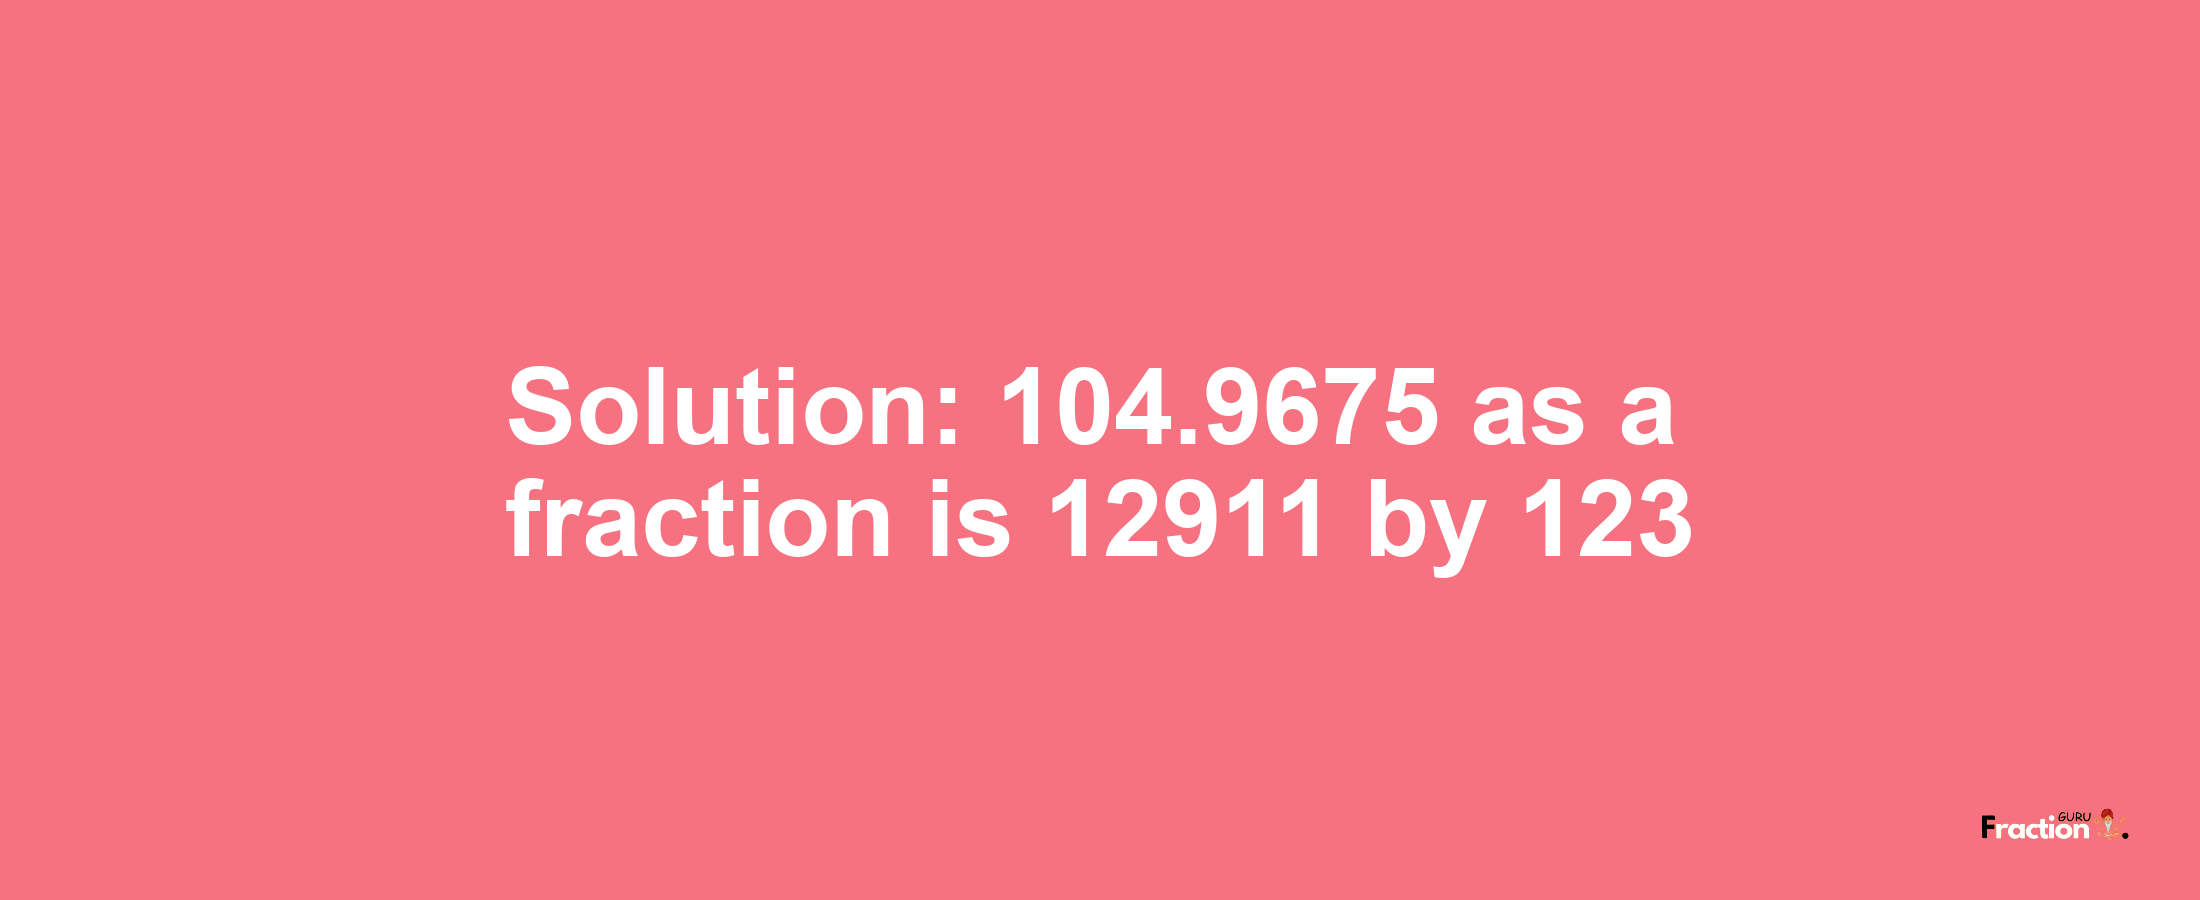 Solution:104.9675 as a fraction is 12911/123